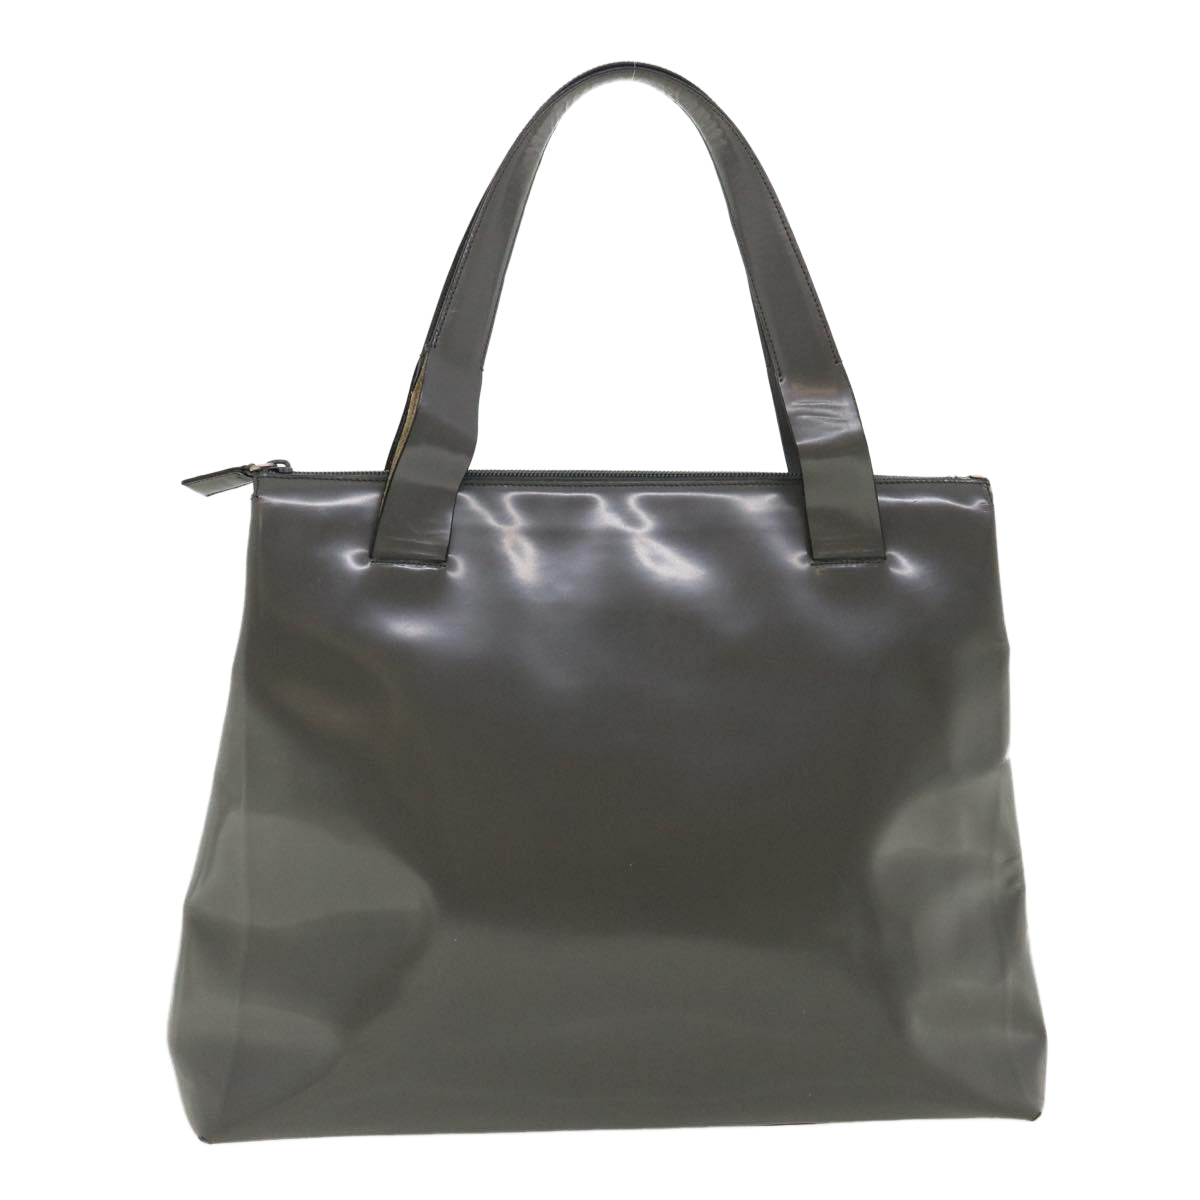 PRADA Tote Bag Patent Leather Gray Auth cl230